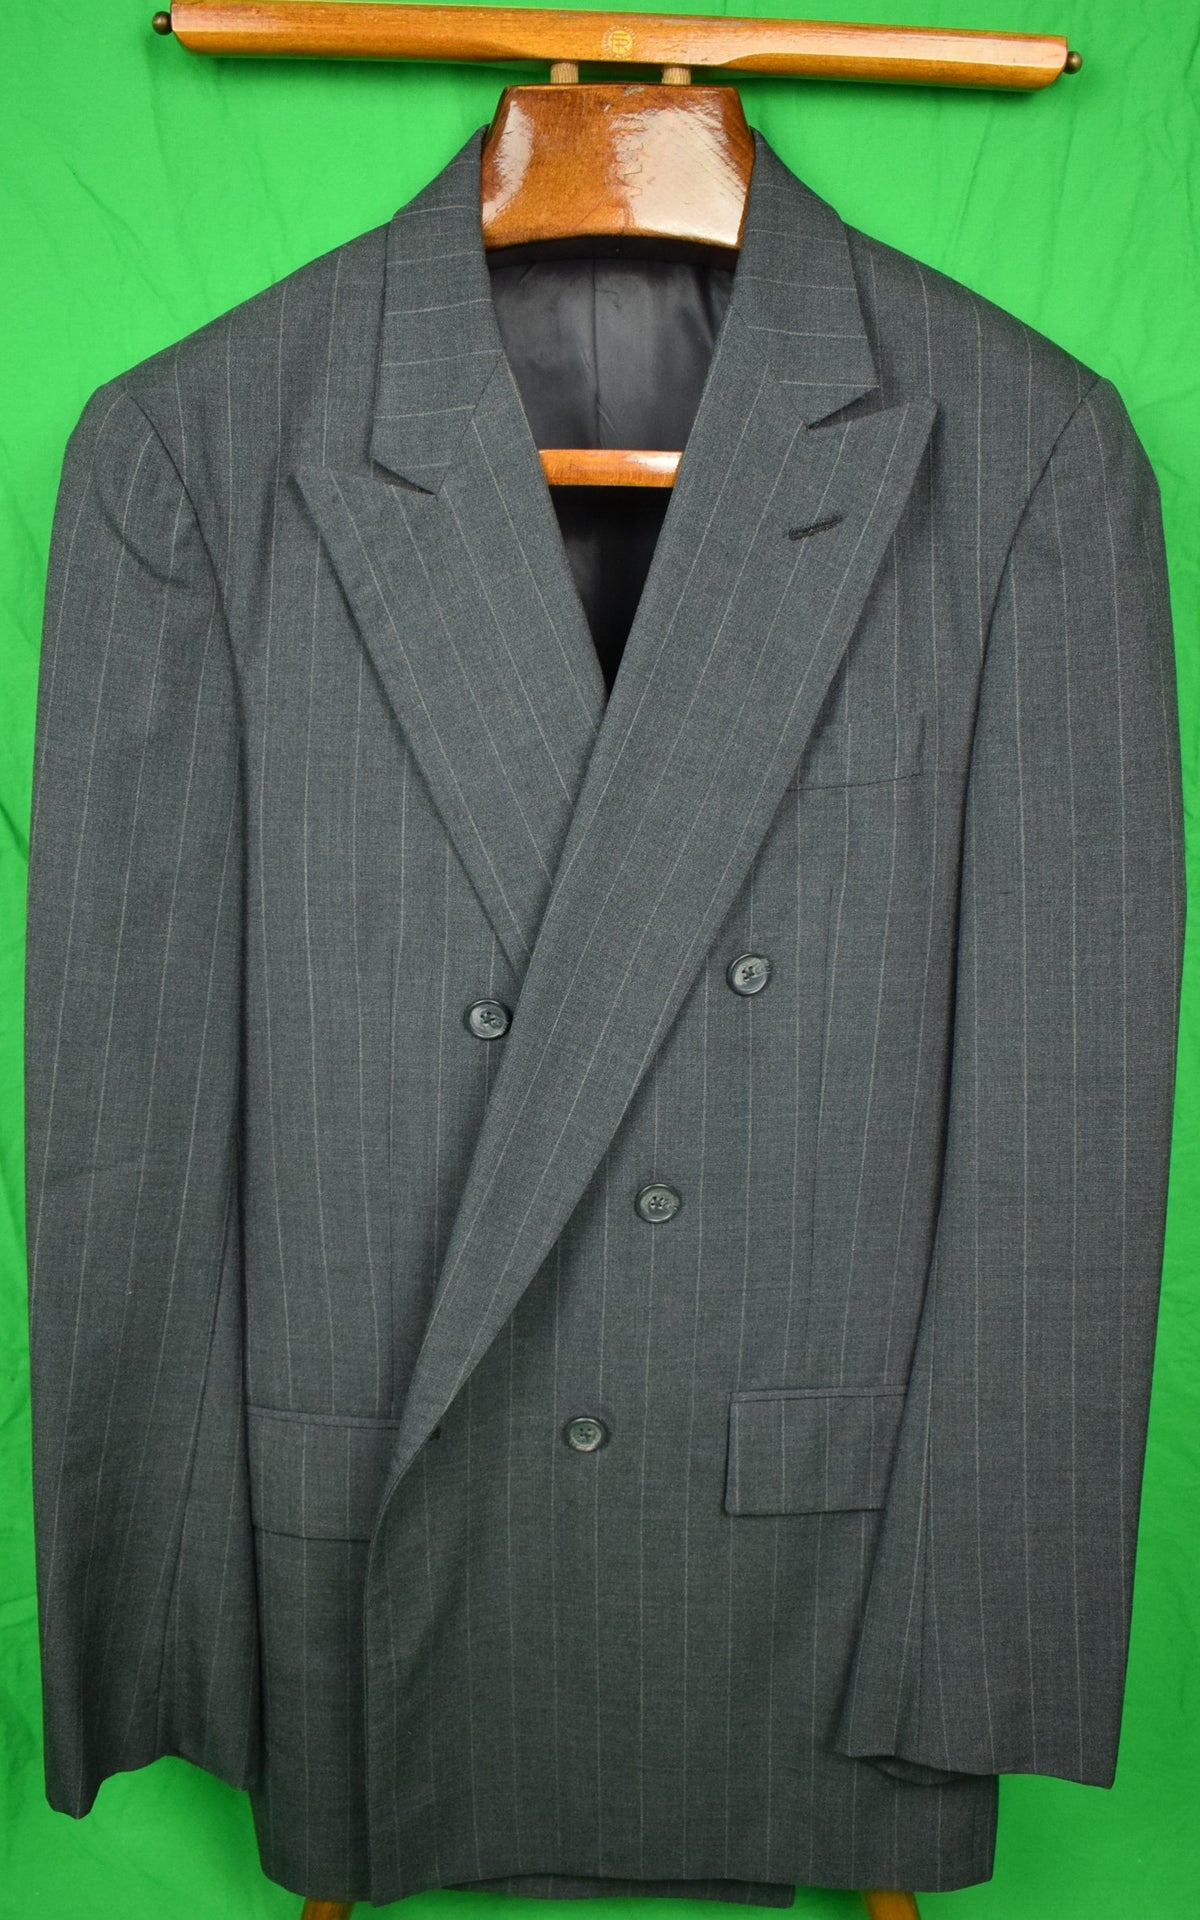 Clothing - Suitings